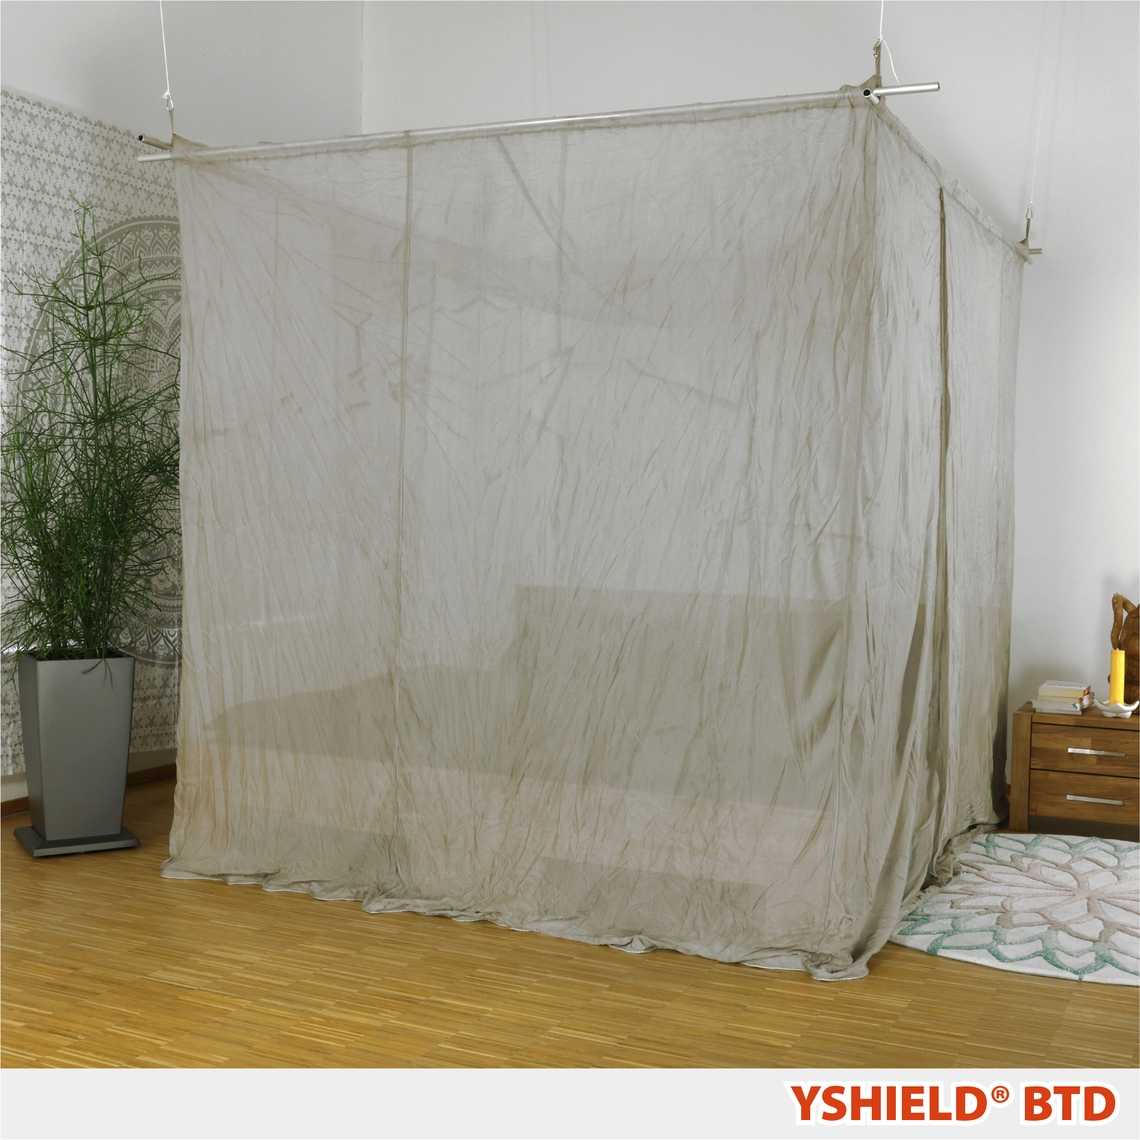 YSHIELD® BTD | Shielding canopy | Double bed | SILVER-TULLE